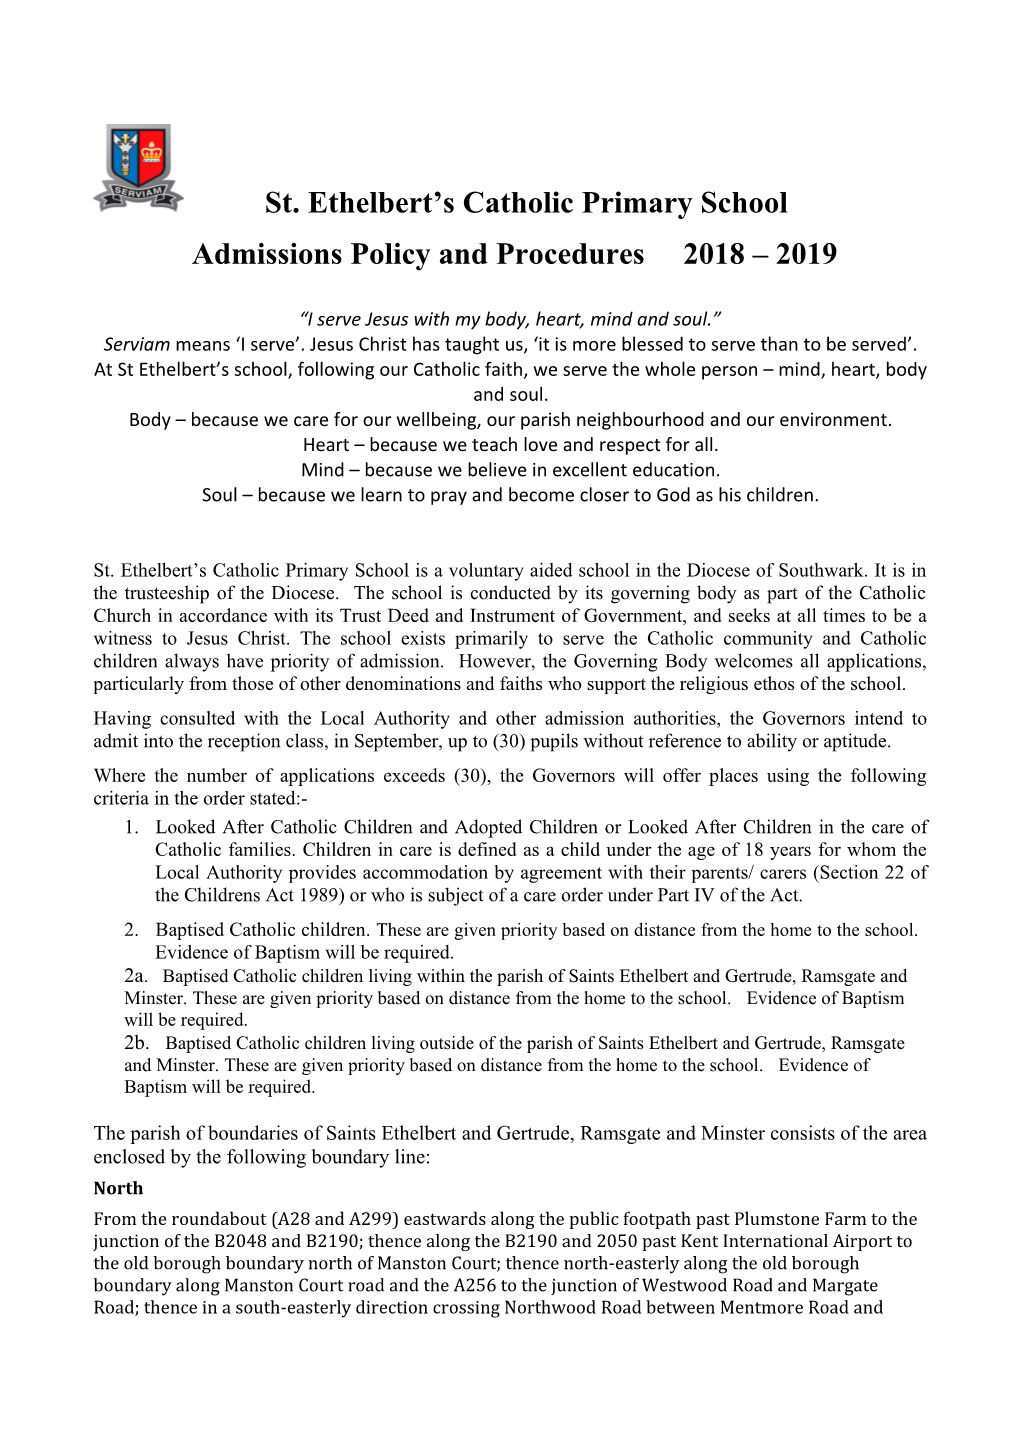 Admissions Policy and Procedures 2018 2019